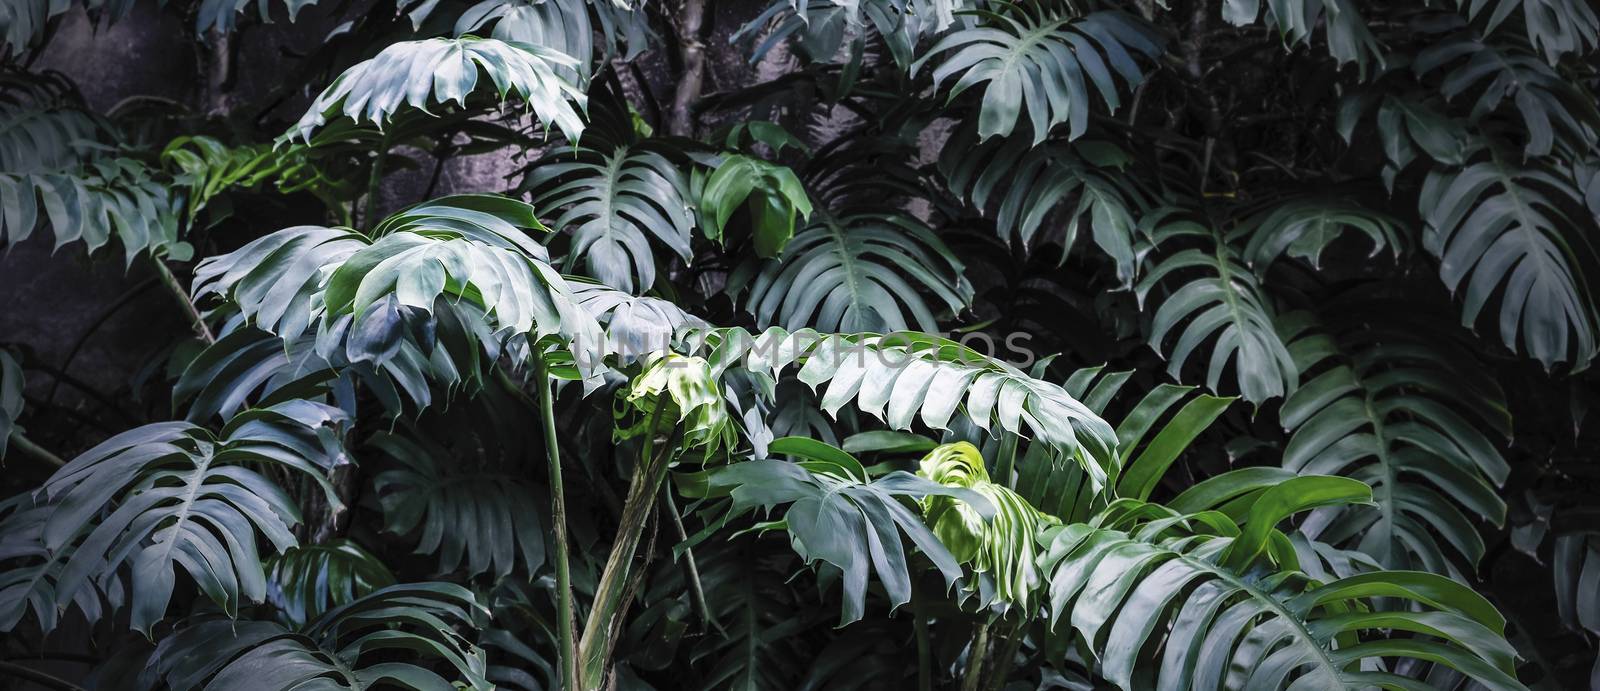  Philodendron in the garden Tropical leaves background